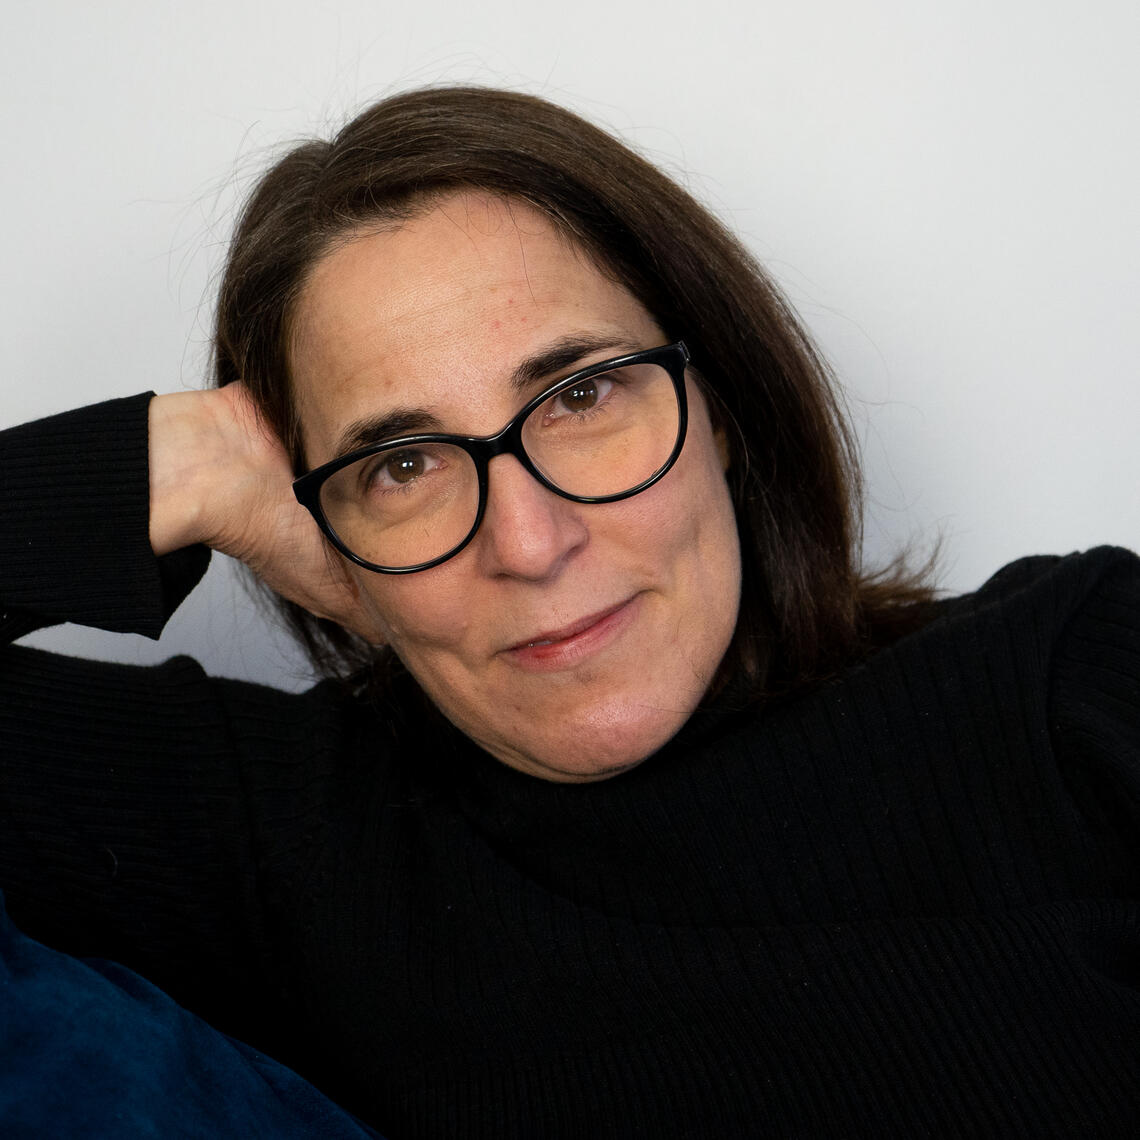 Xenia Reloba de la Cruz leans on one arm and smiles in front of a white background. She is wearing a black turtleneck and black glasses.